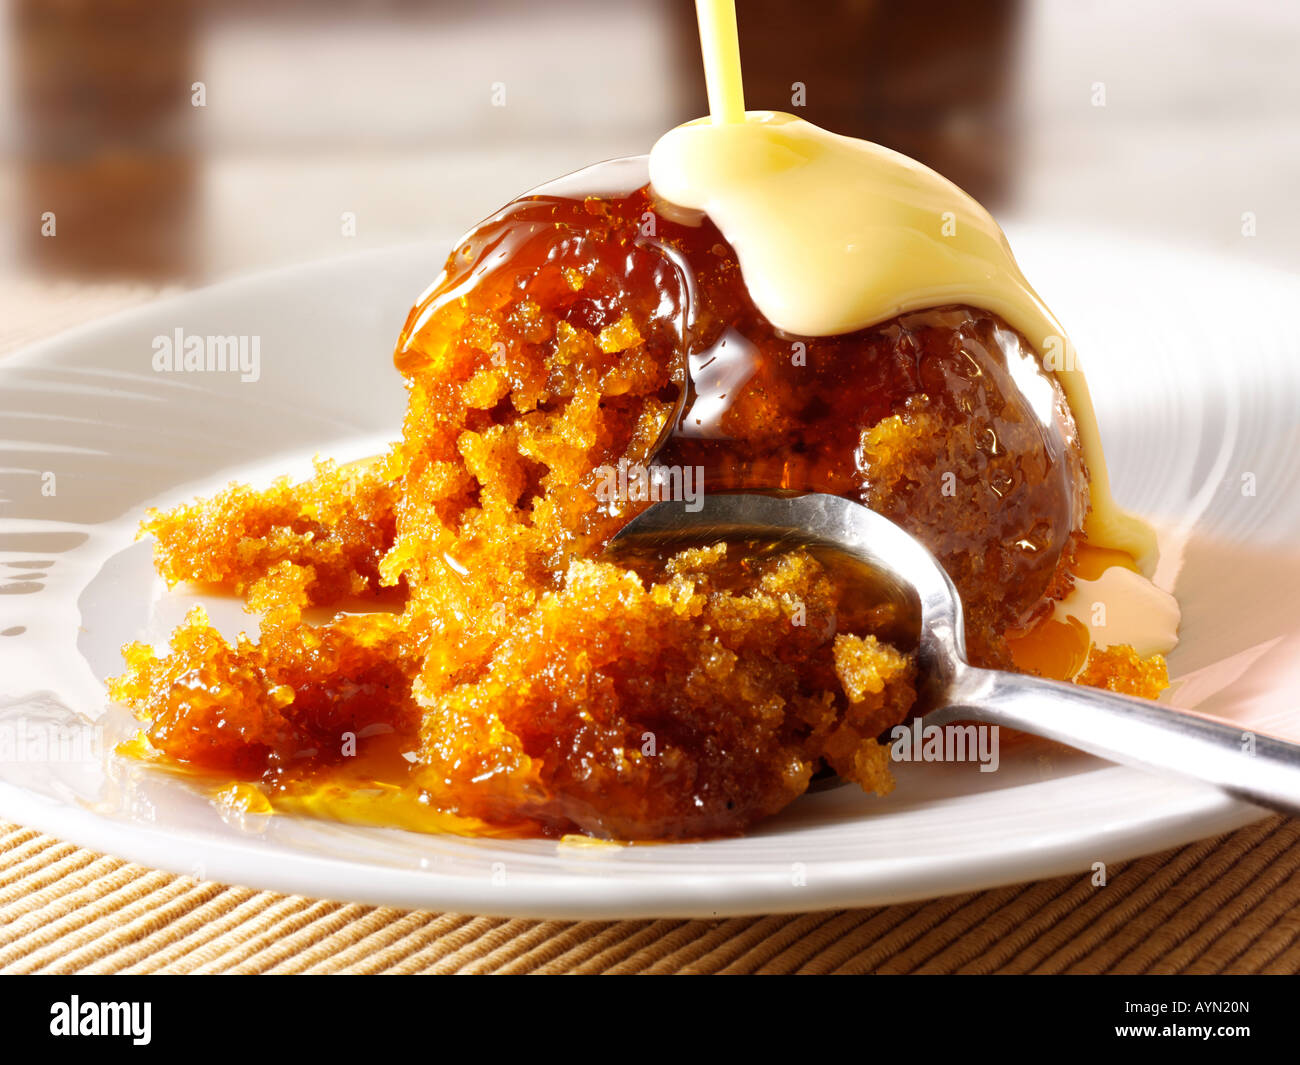 Traditional British Sticky Toffee sponge Pudding and custard dessert being served onto a plate Stock Photo